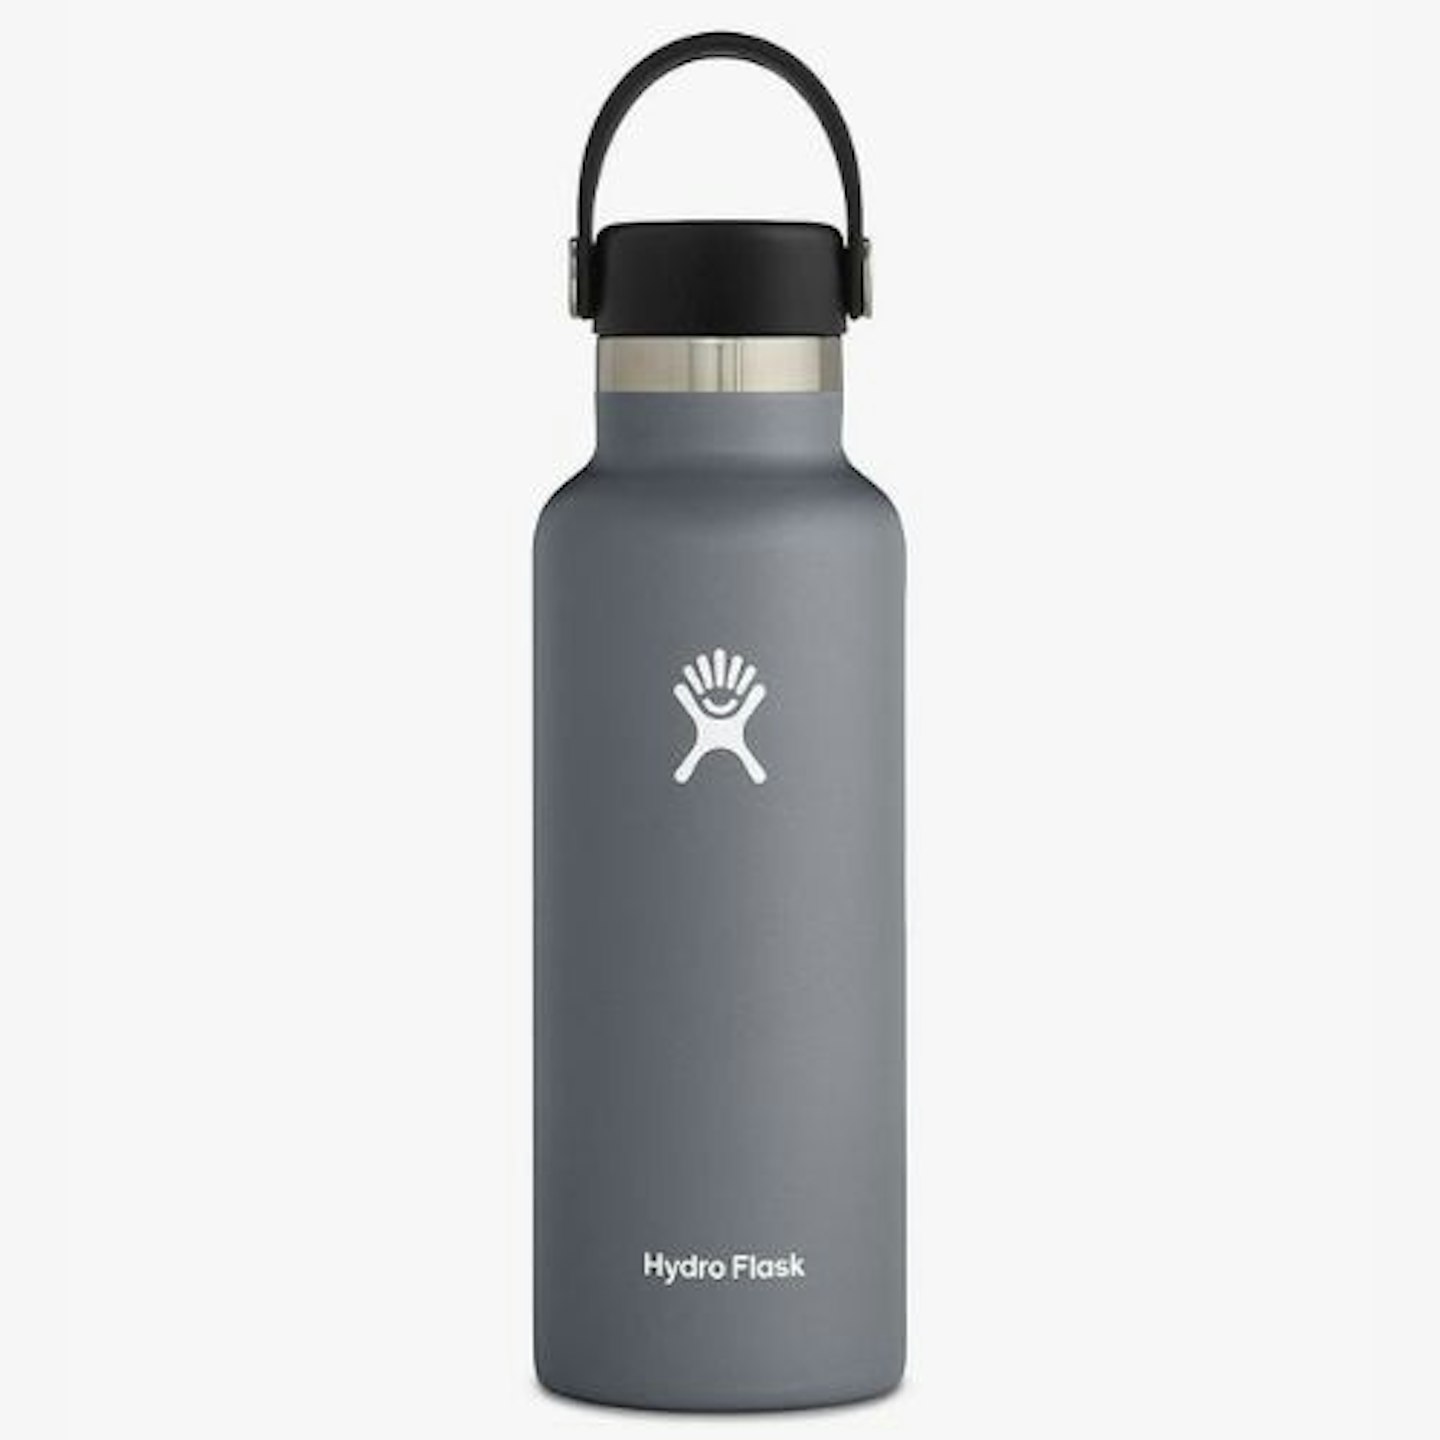 Hydro Flask Double Wall Vacuum Insulated Stainless Steel Drinks Bottle